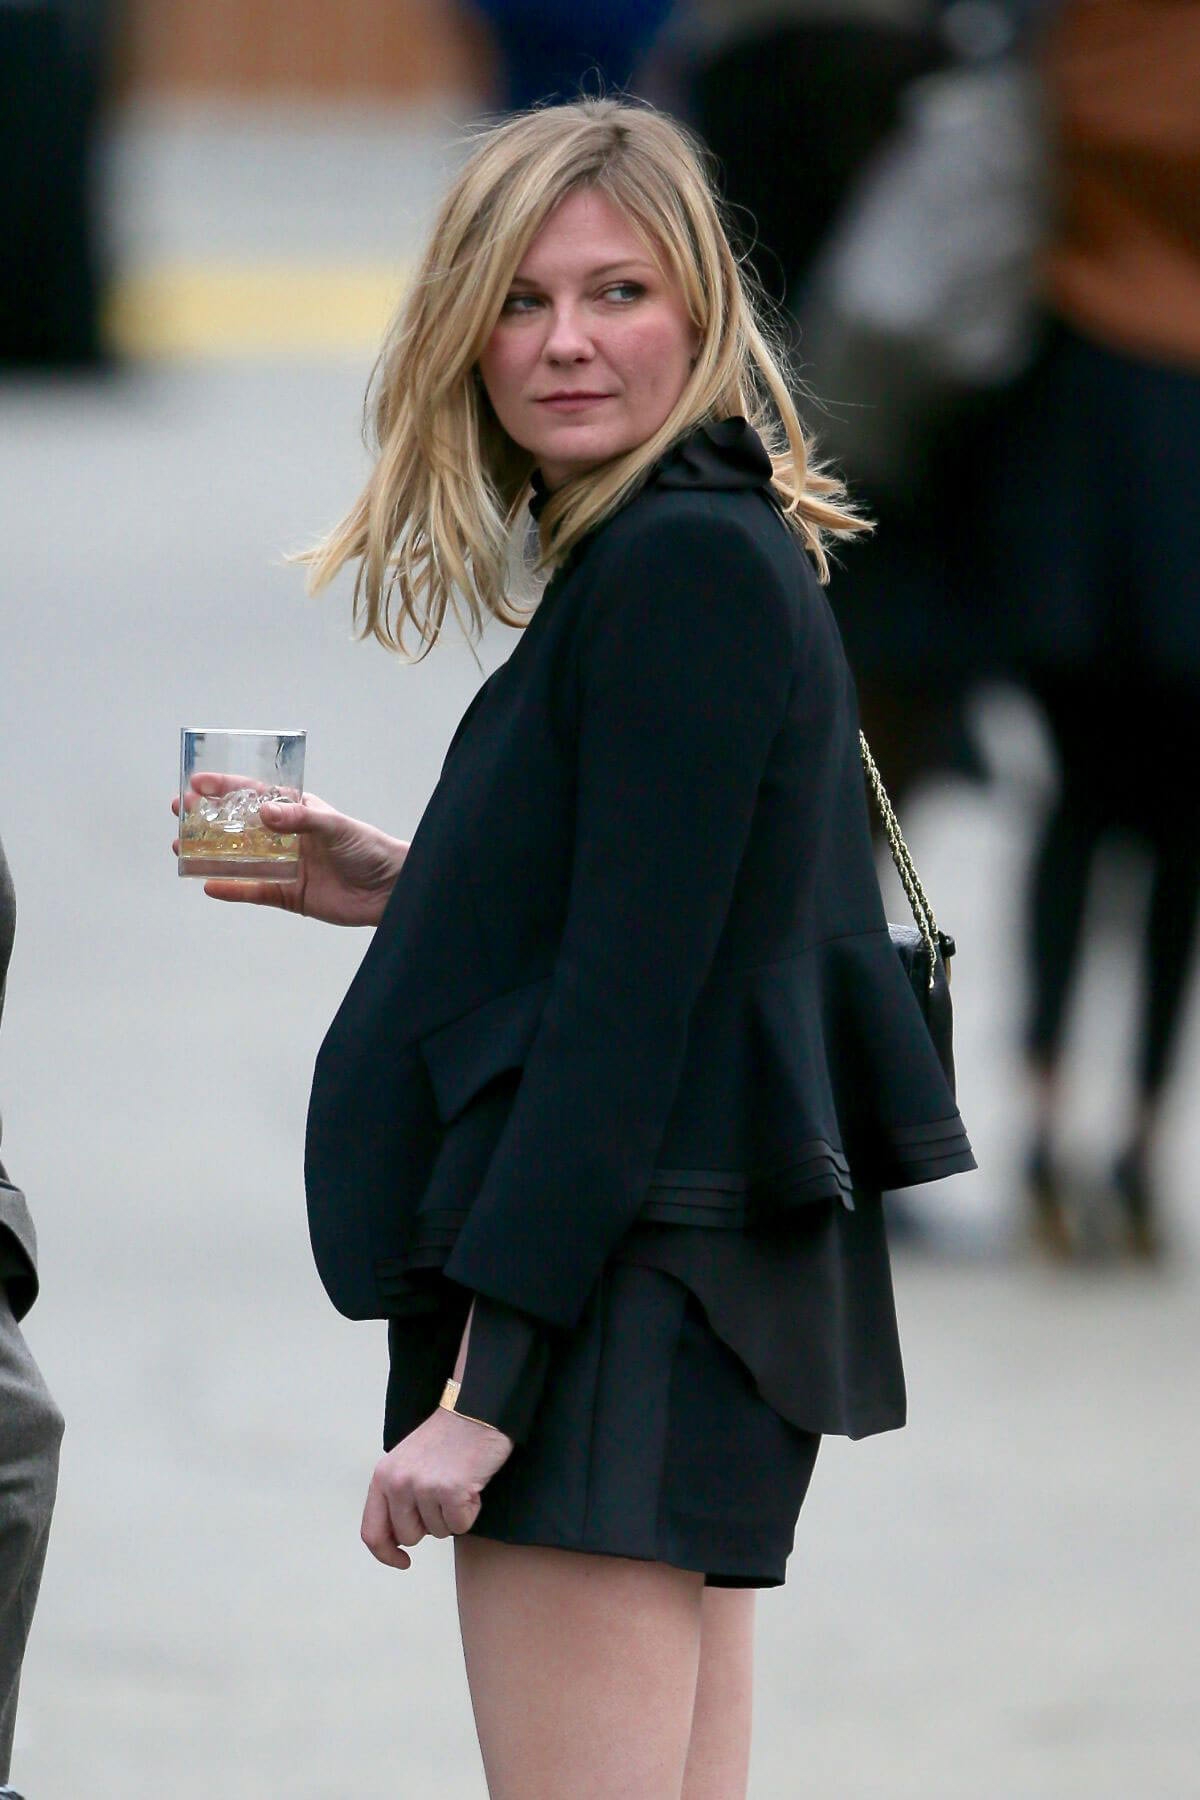 Kirsten Dunst Stills Out and About in Santa Monica